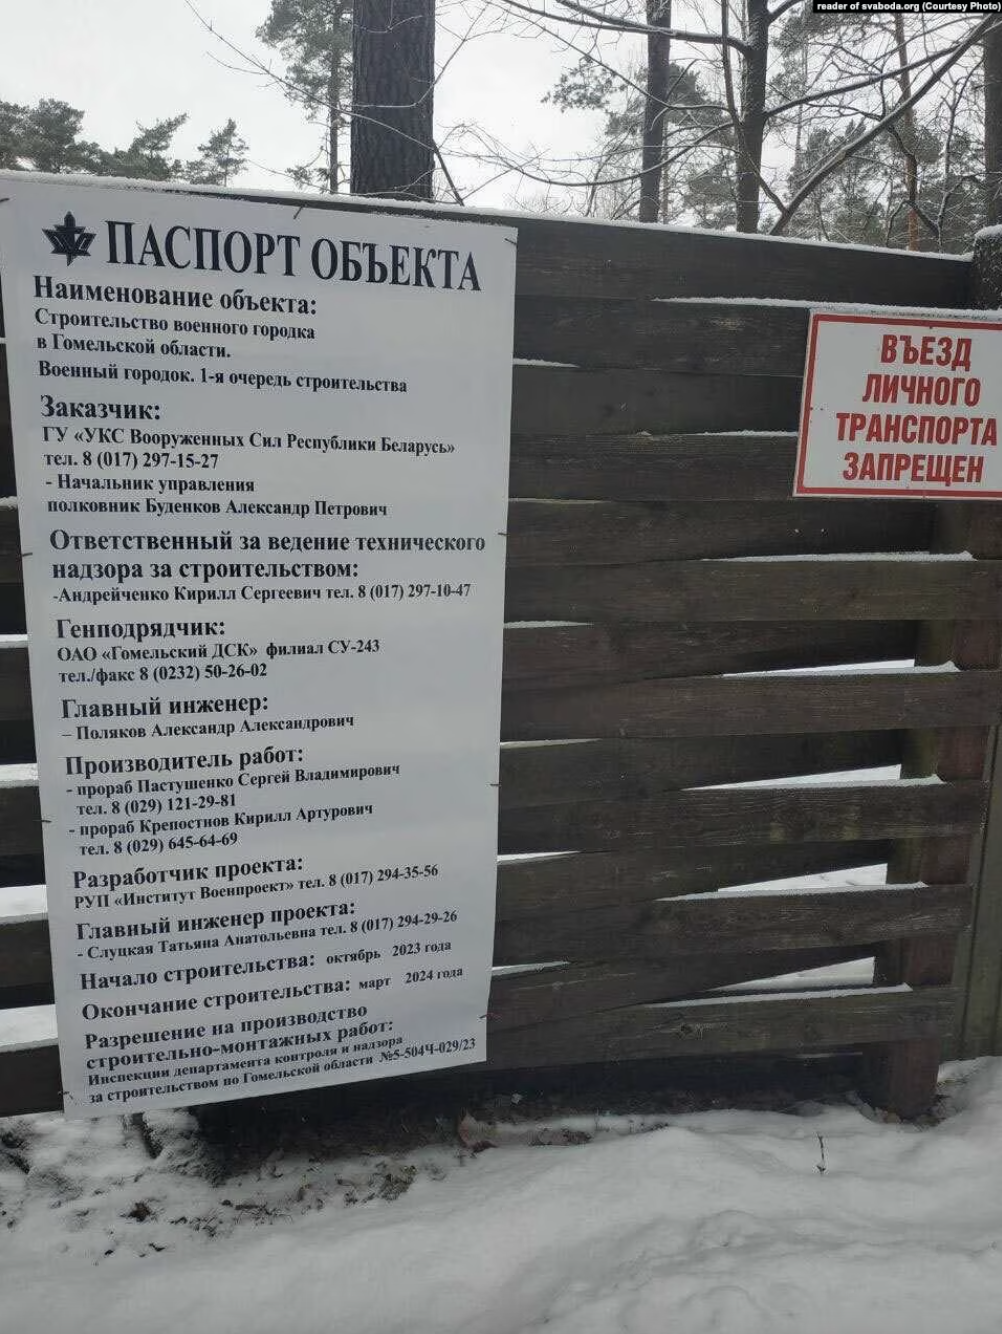 The Belarusian Defense Ministry is building a military town near the border with Ukraine. Photo